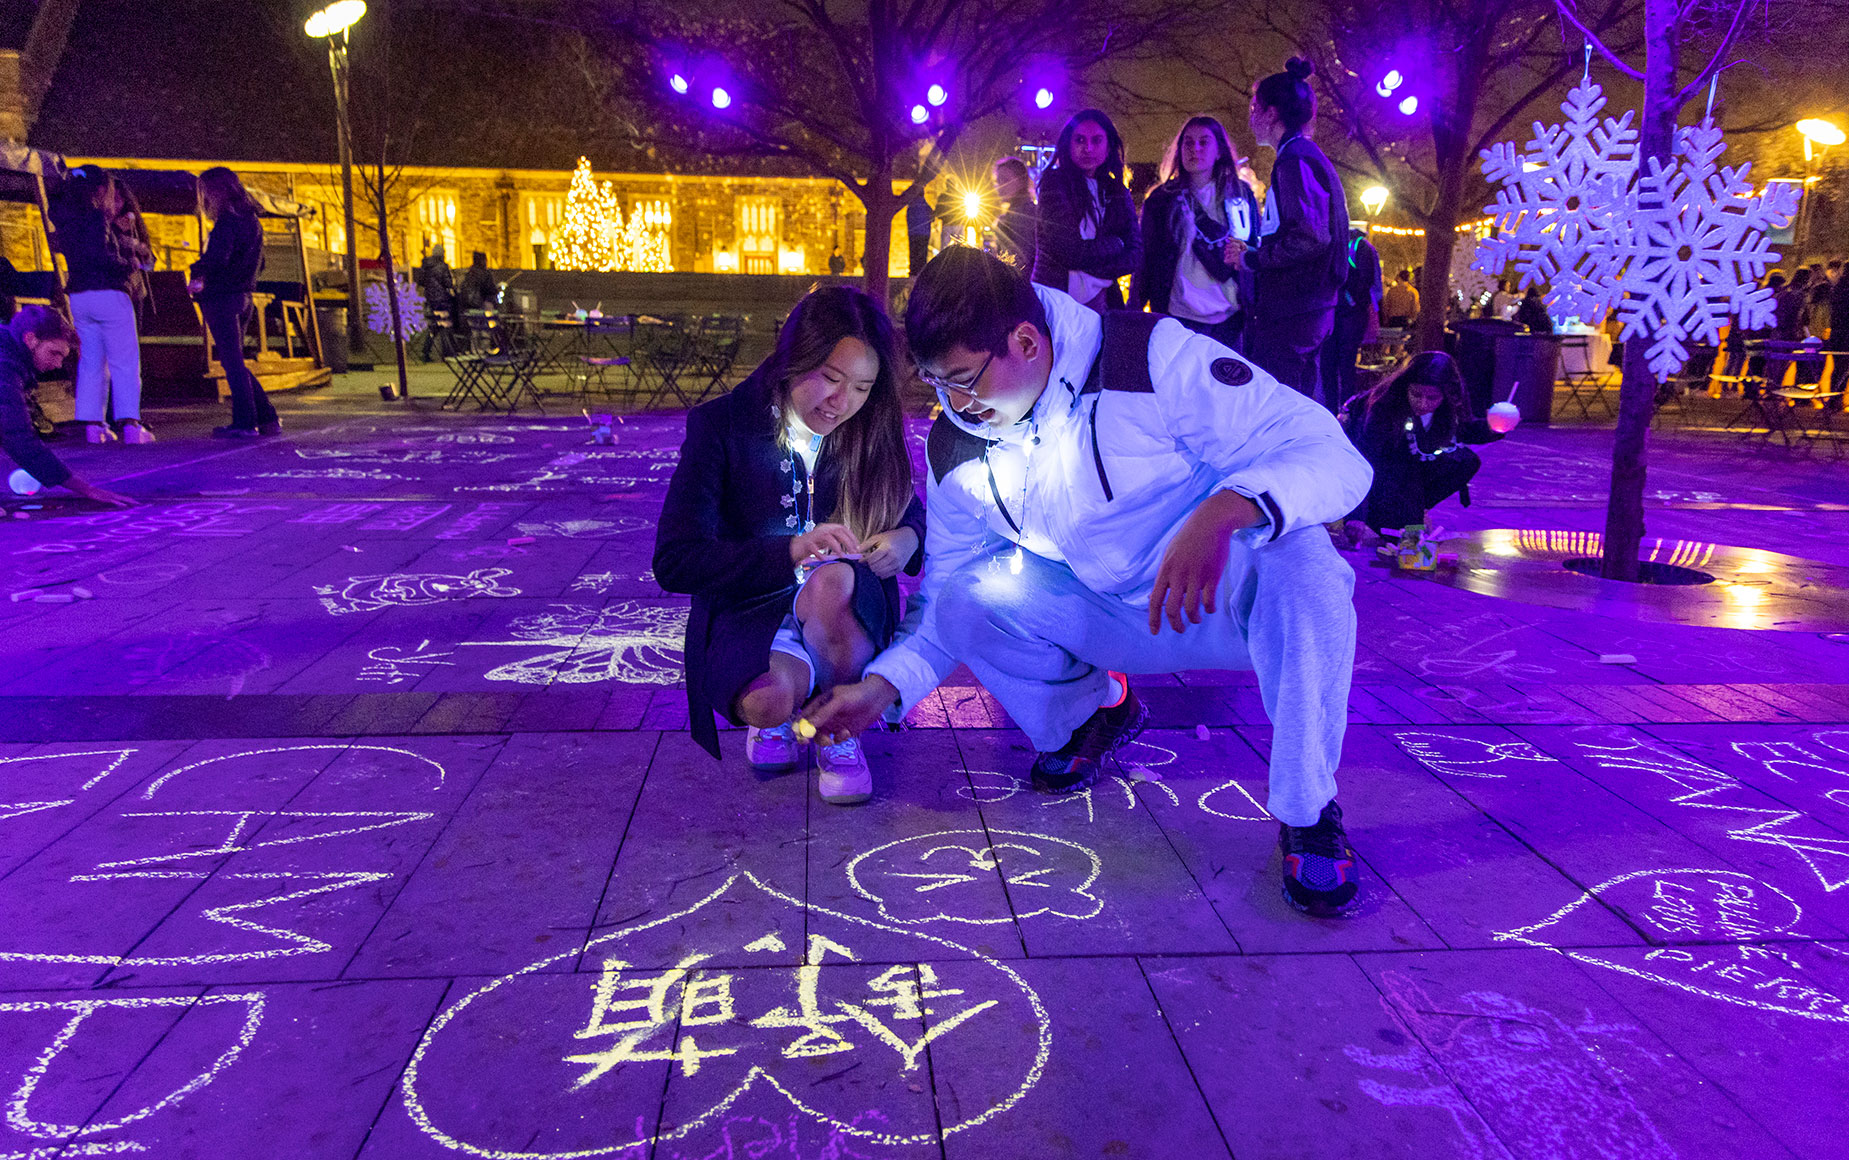 Students use glow chalk to write messages on the Plaza floor. Photo by Jared Lazarus